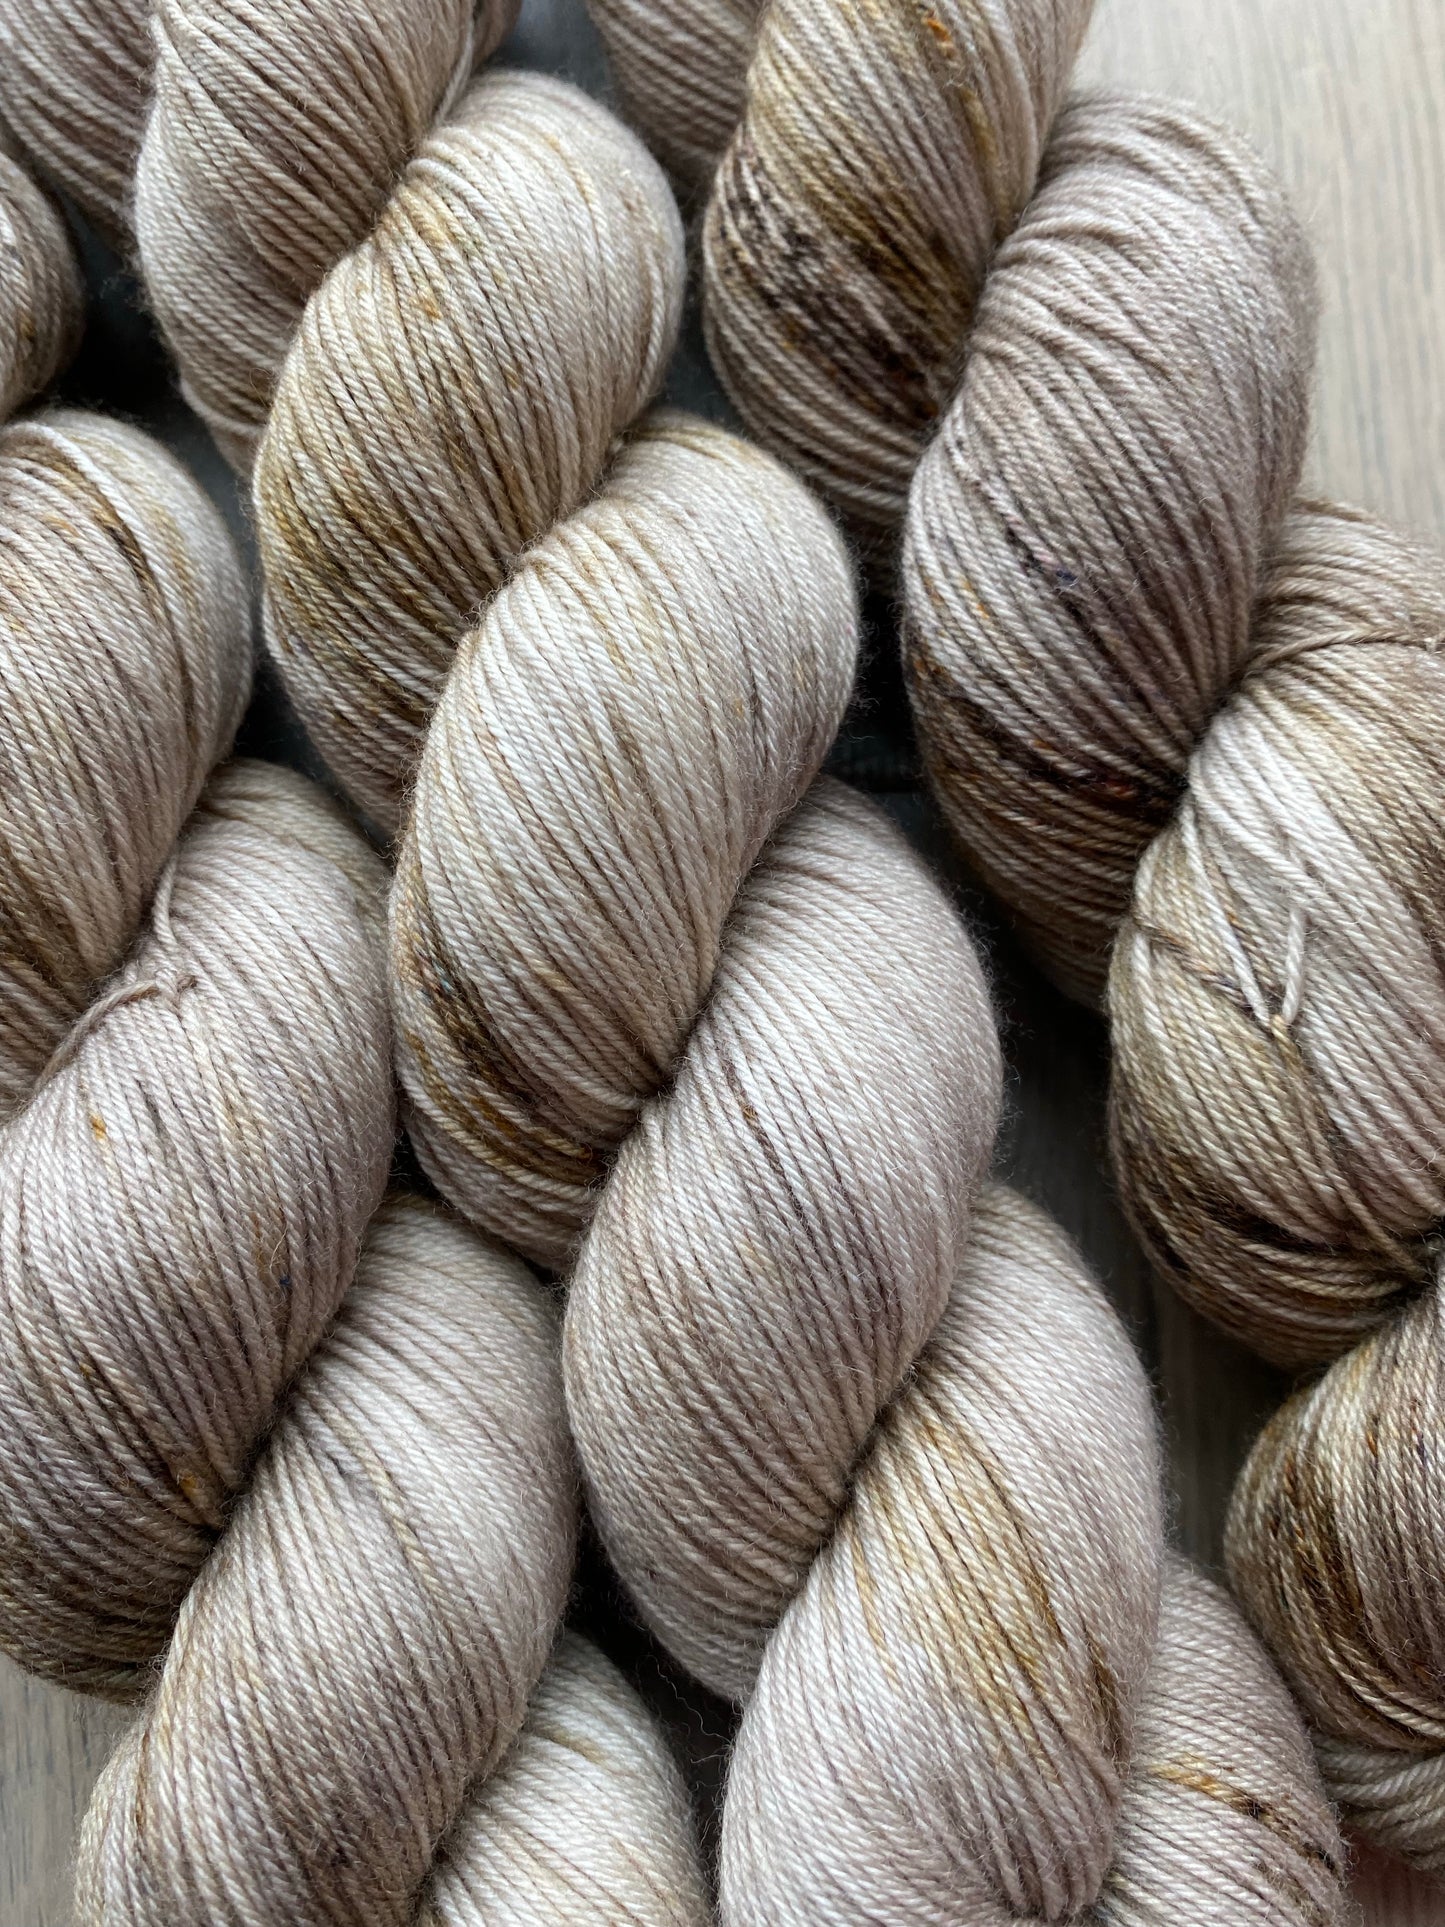 Chocolate Chip Cookie Dough Fingering Yarn